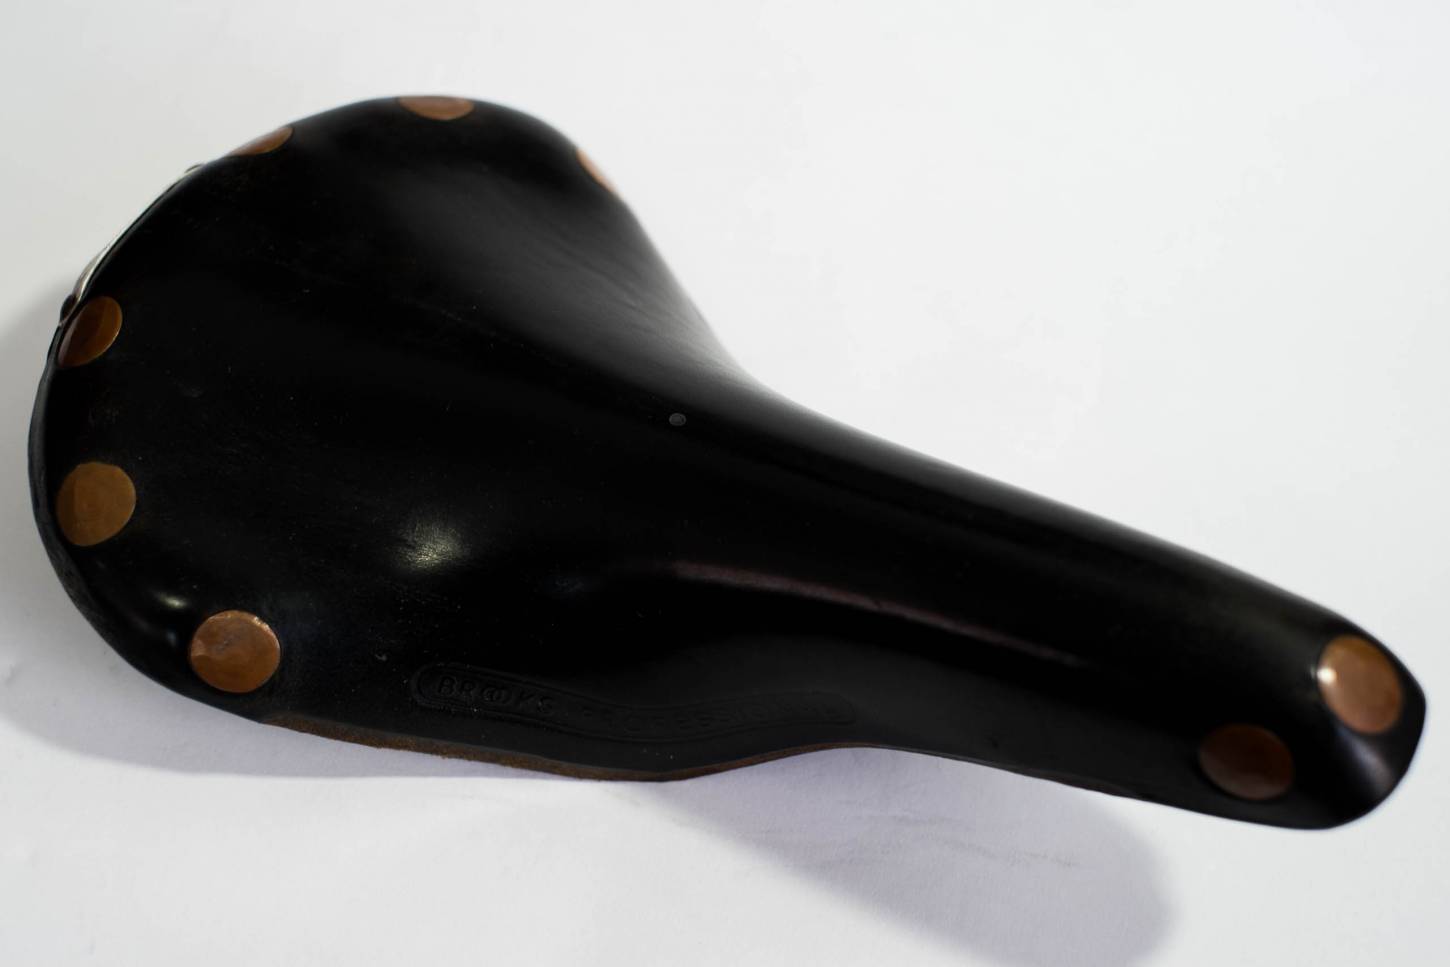 Brooks Professional Saddle in pelle nera con borchie in rame Vintage Saddle in pelle nera